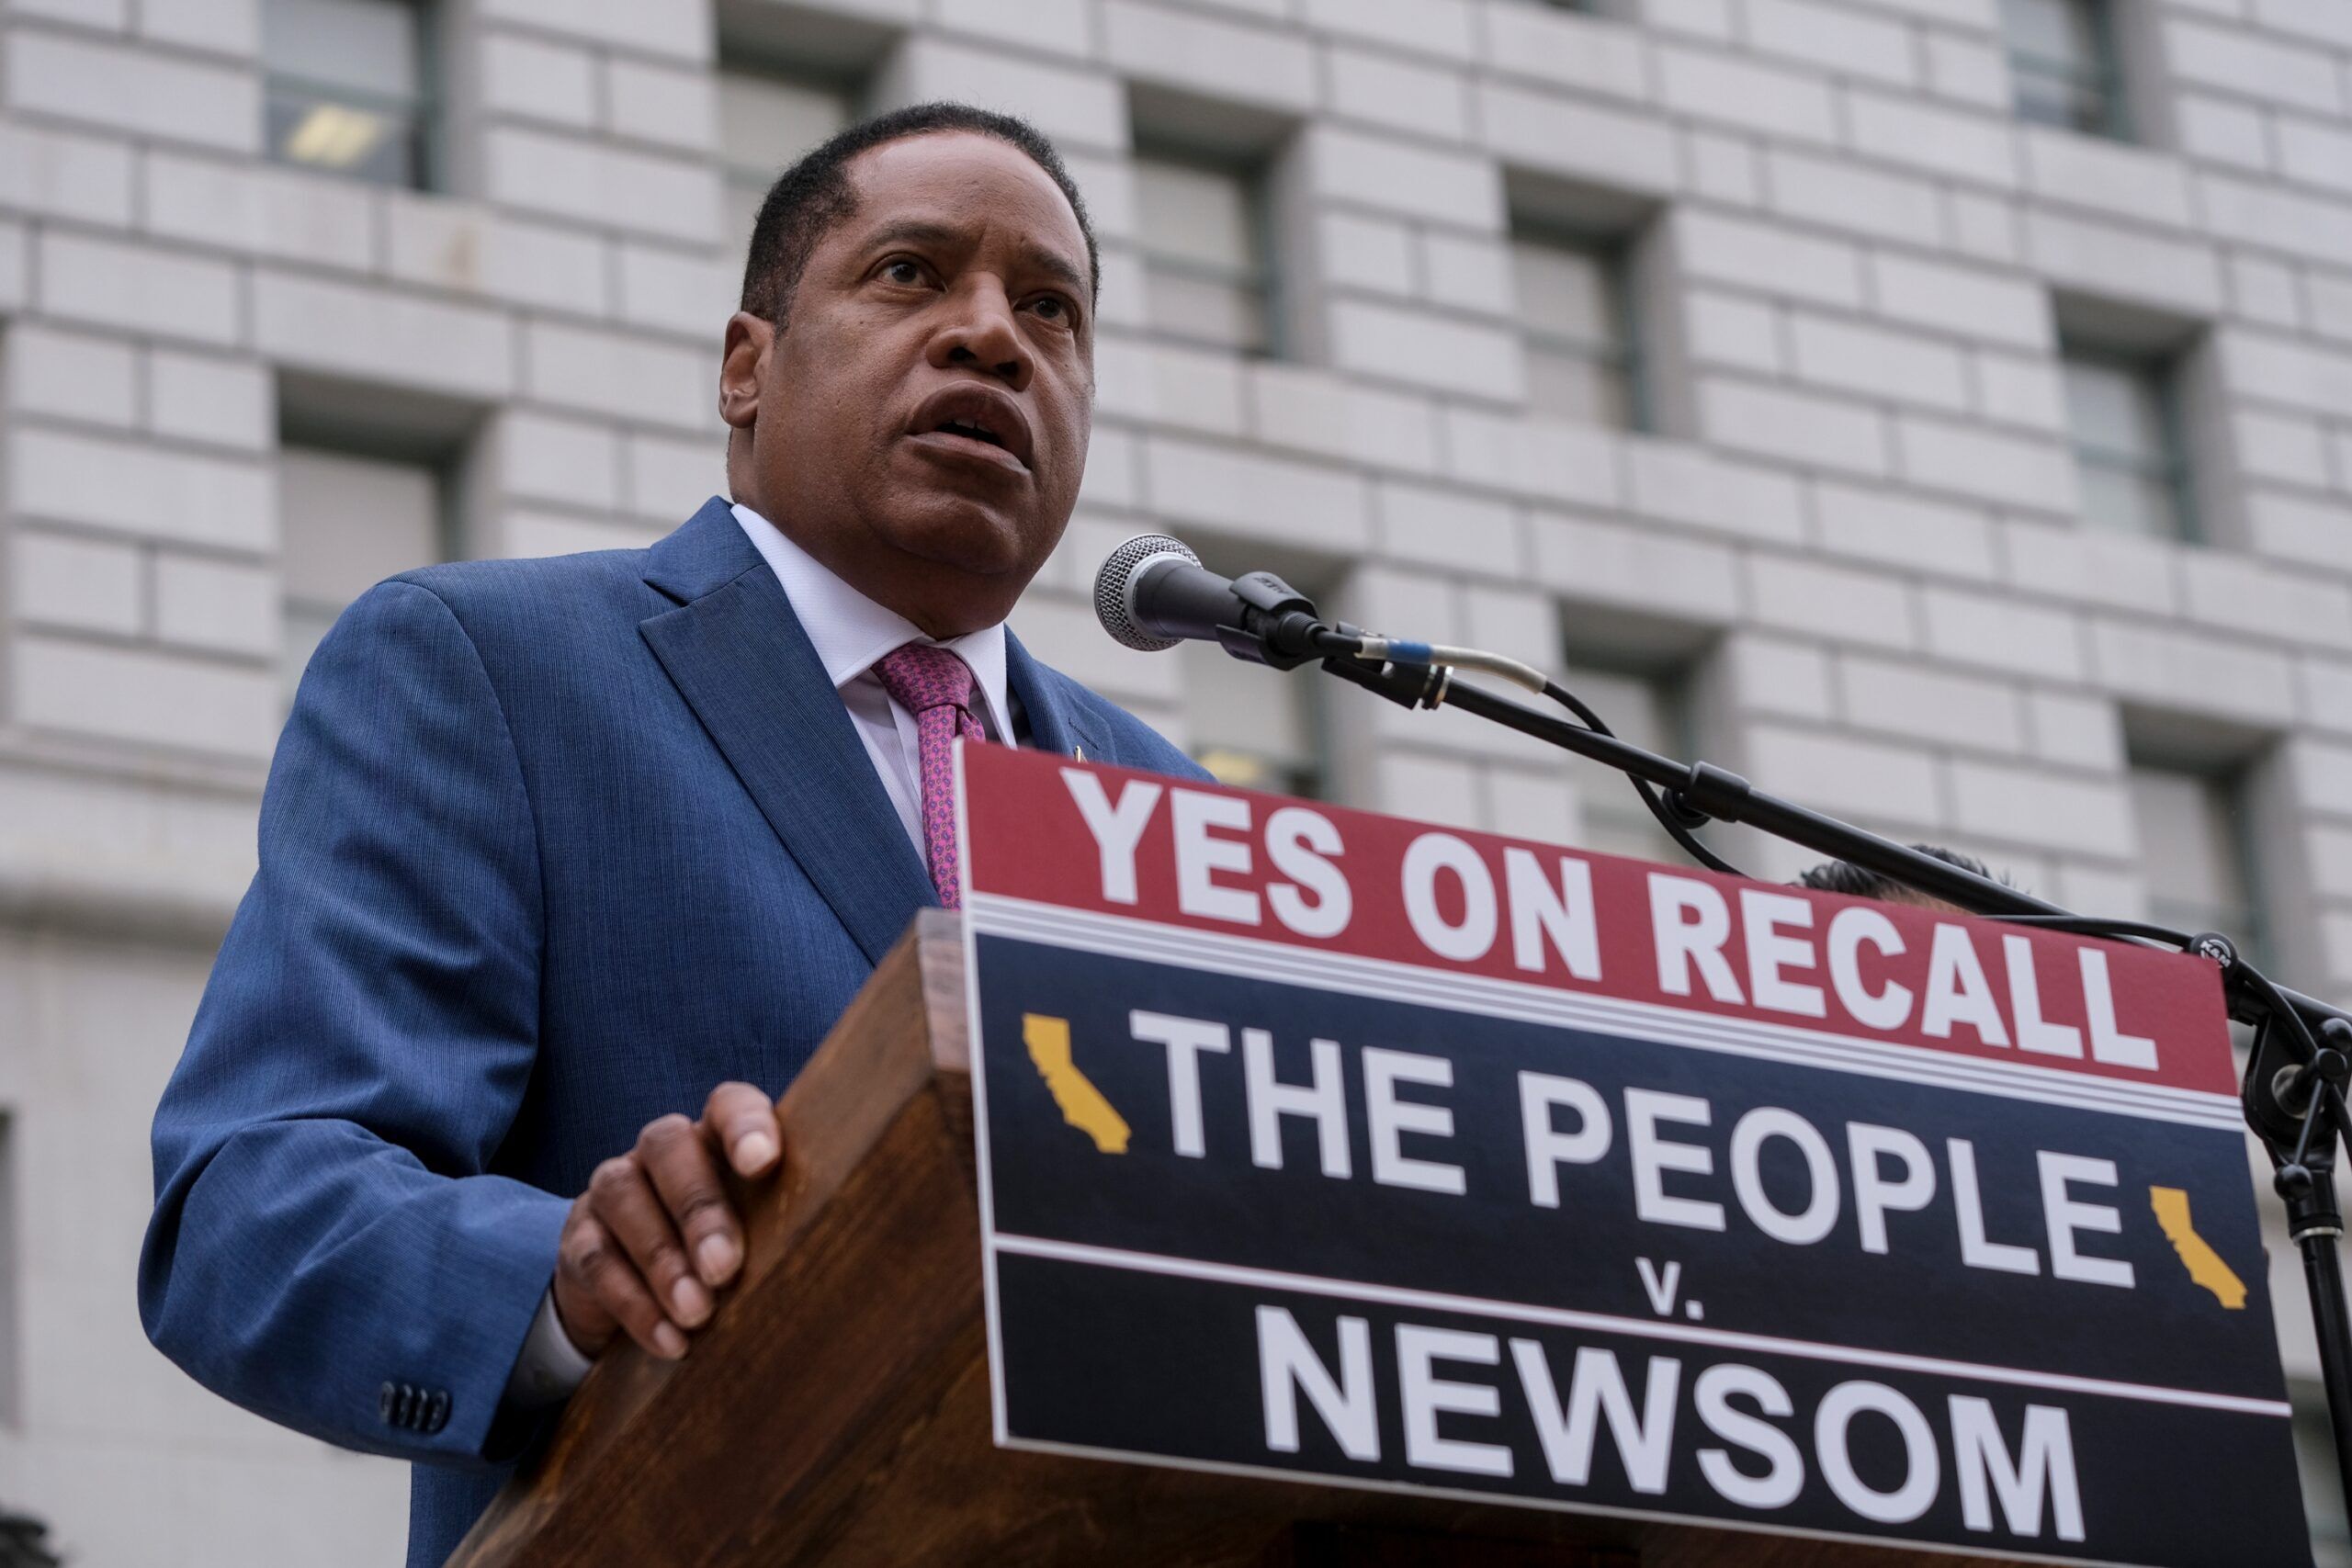 Larry Elder, California recall election, right-wing media, recall elections, Fox News, voter fraud, conspiracy theories